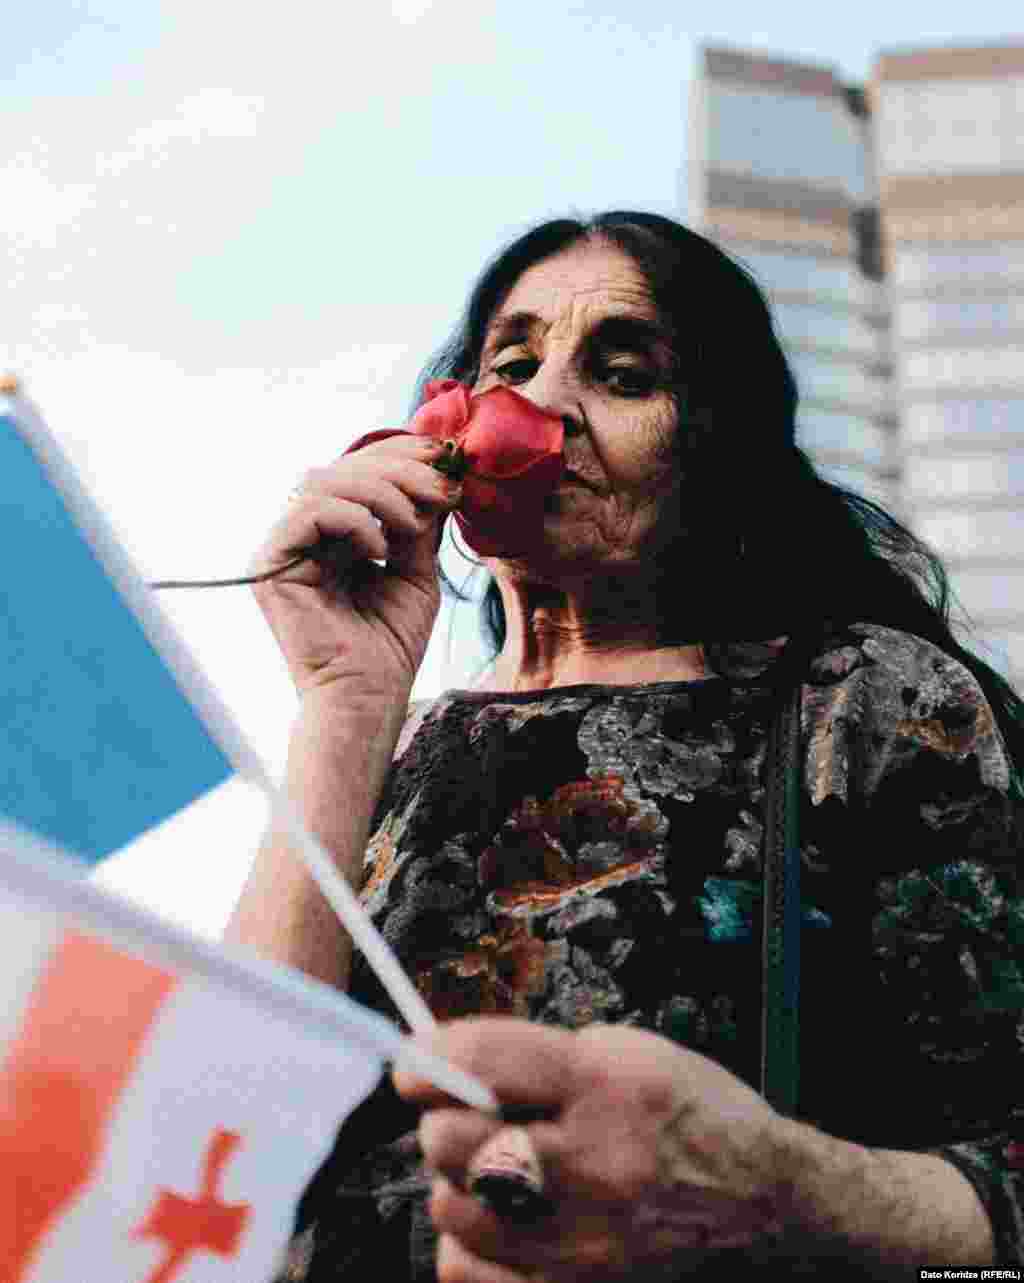 Another protester smells a rose as she attends the rally. Zurabishvili said her major concern is the fact that the bill is &quot;exactly a copy of [Russian President Vladimir] Putin&#39;s law.&quot;